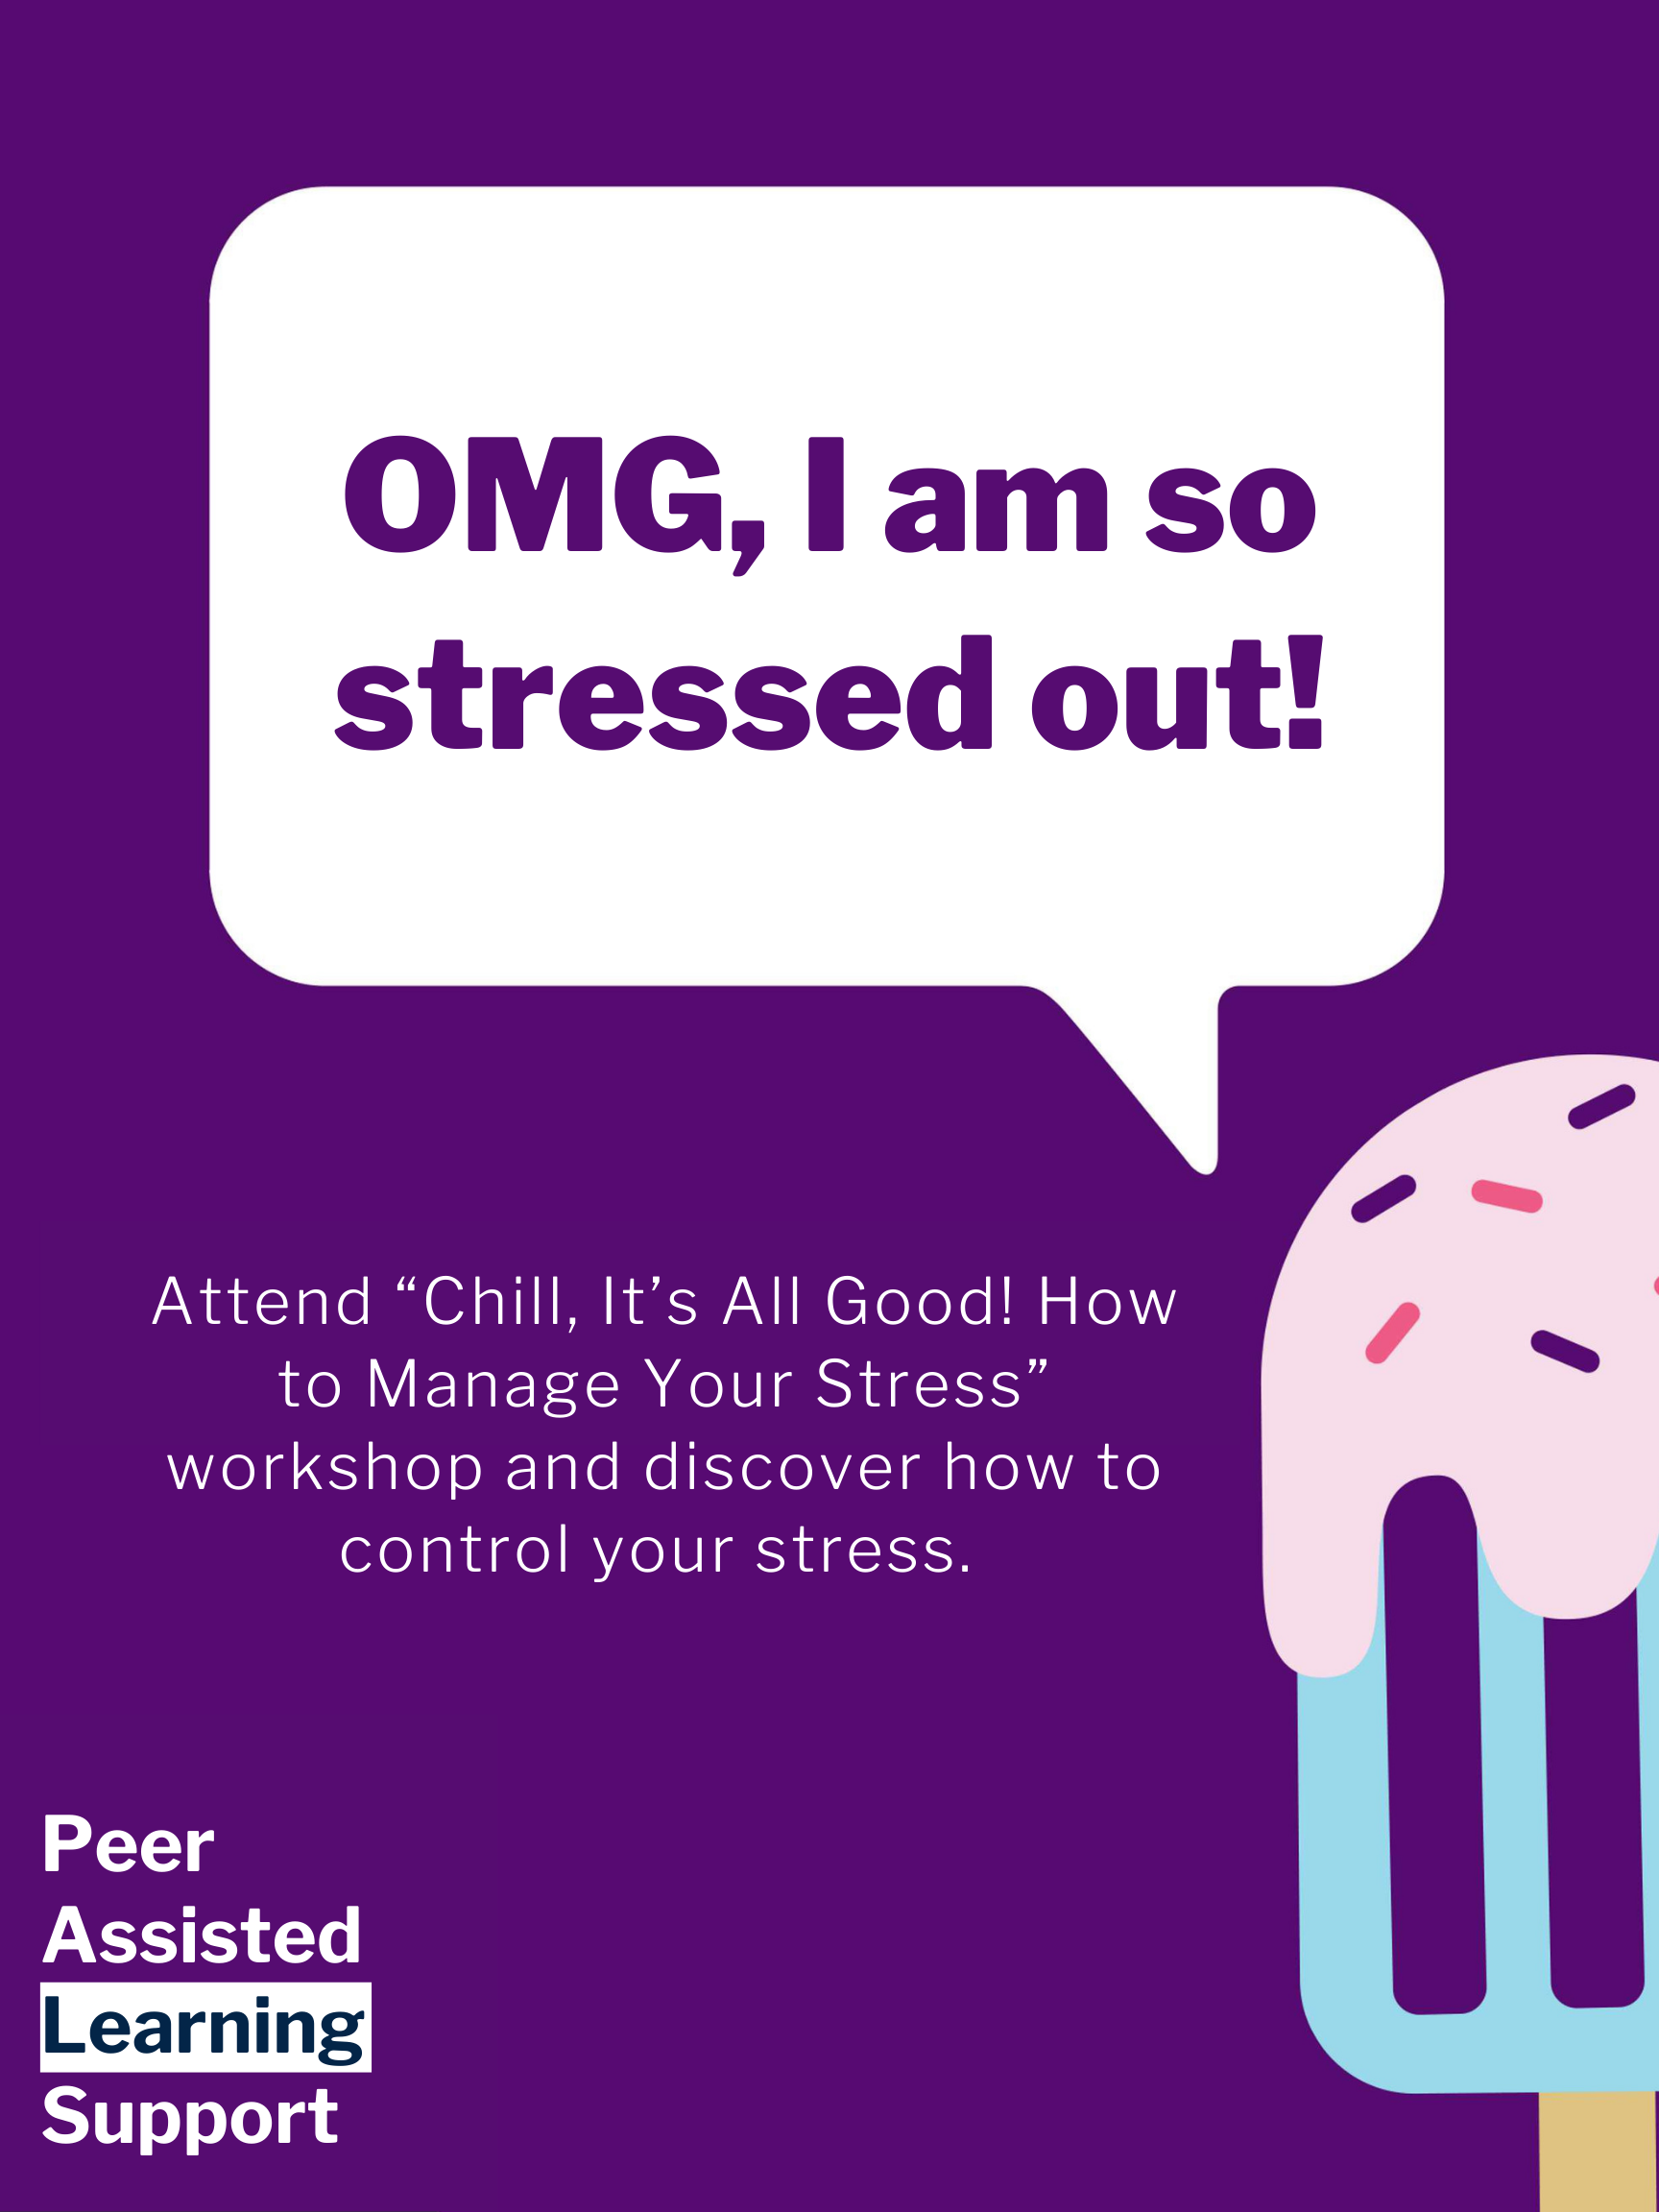 "OMG, I am so stressed out!" in a speech bubble